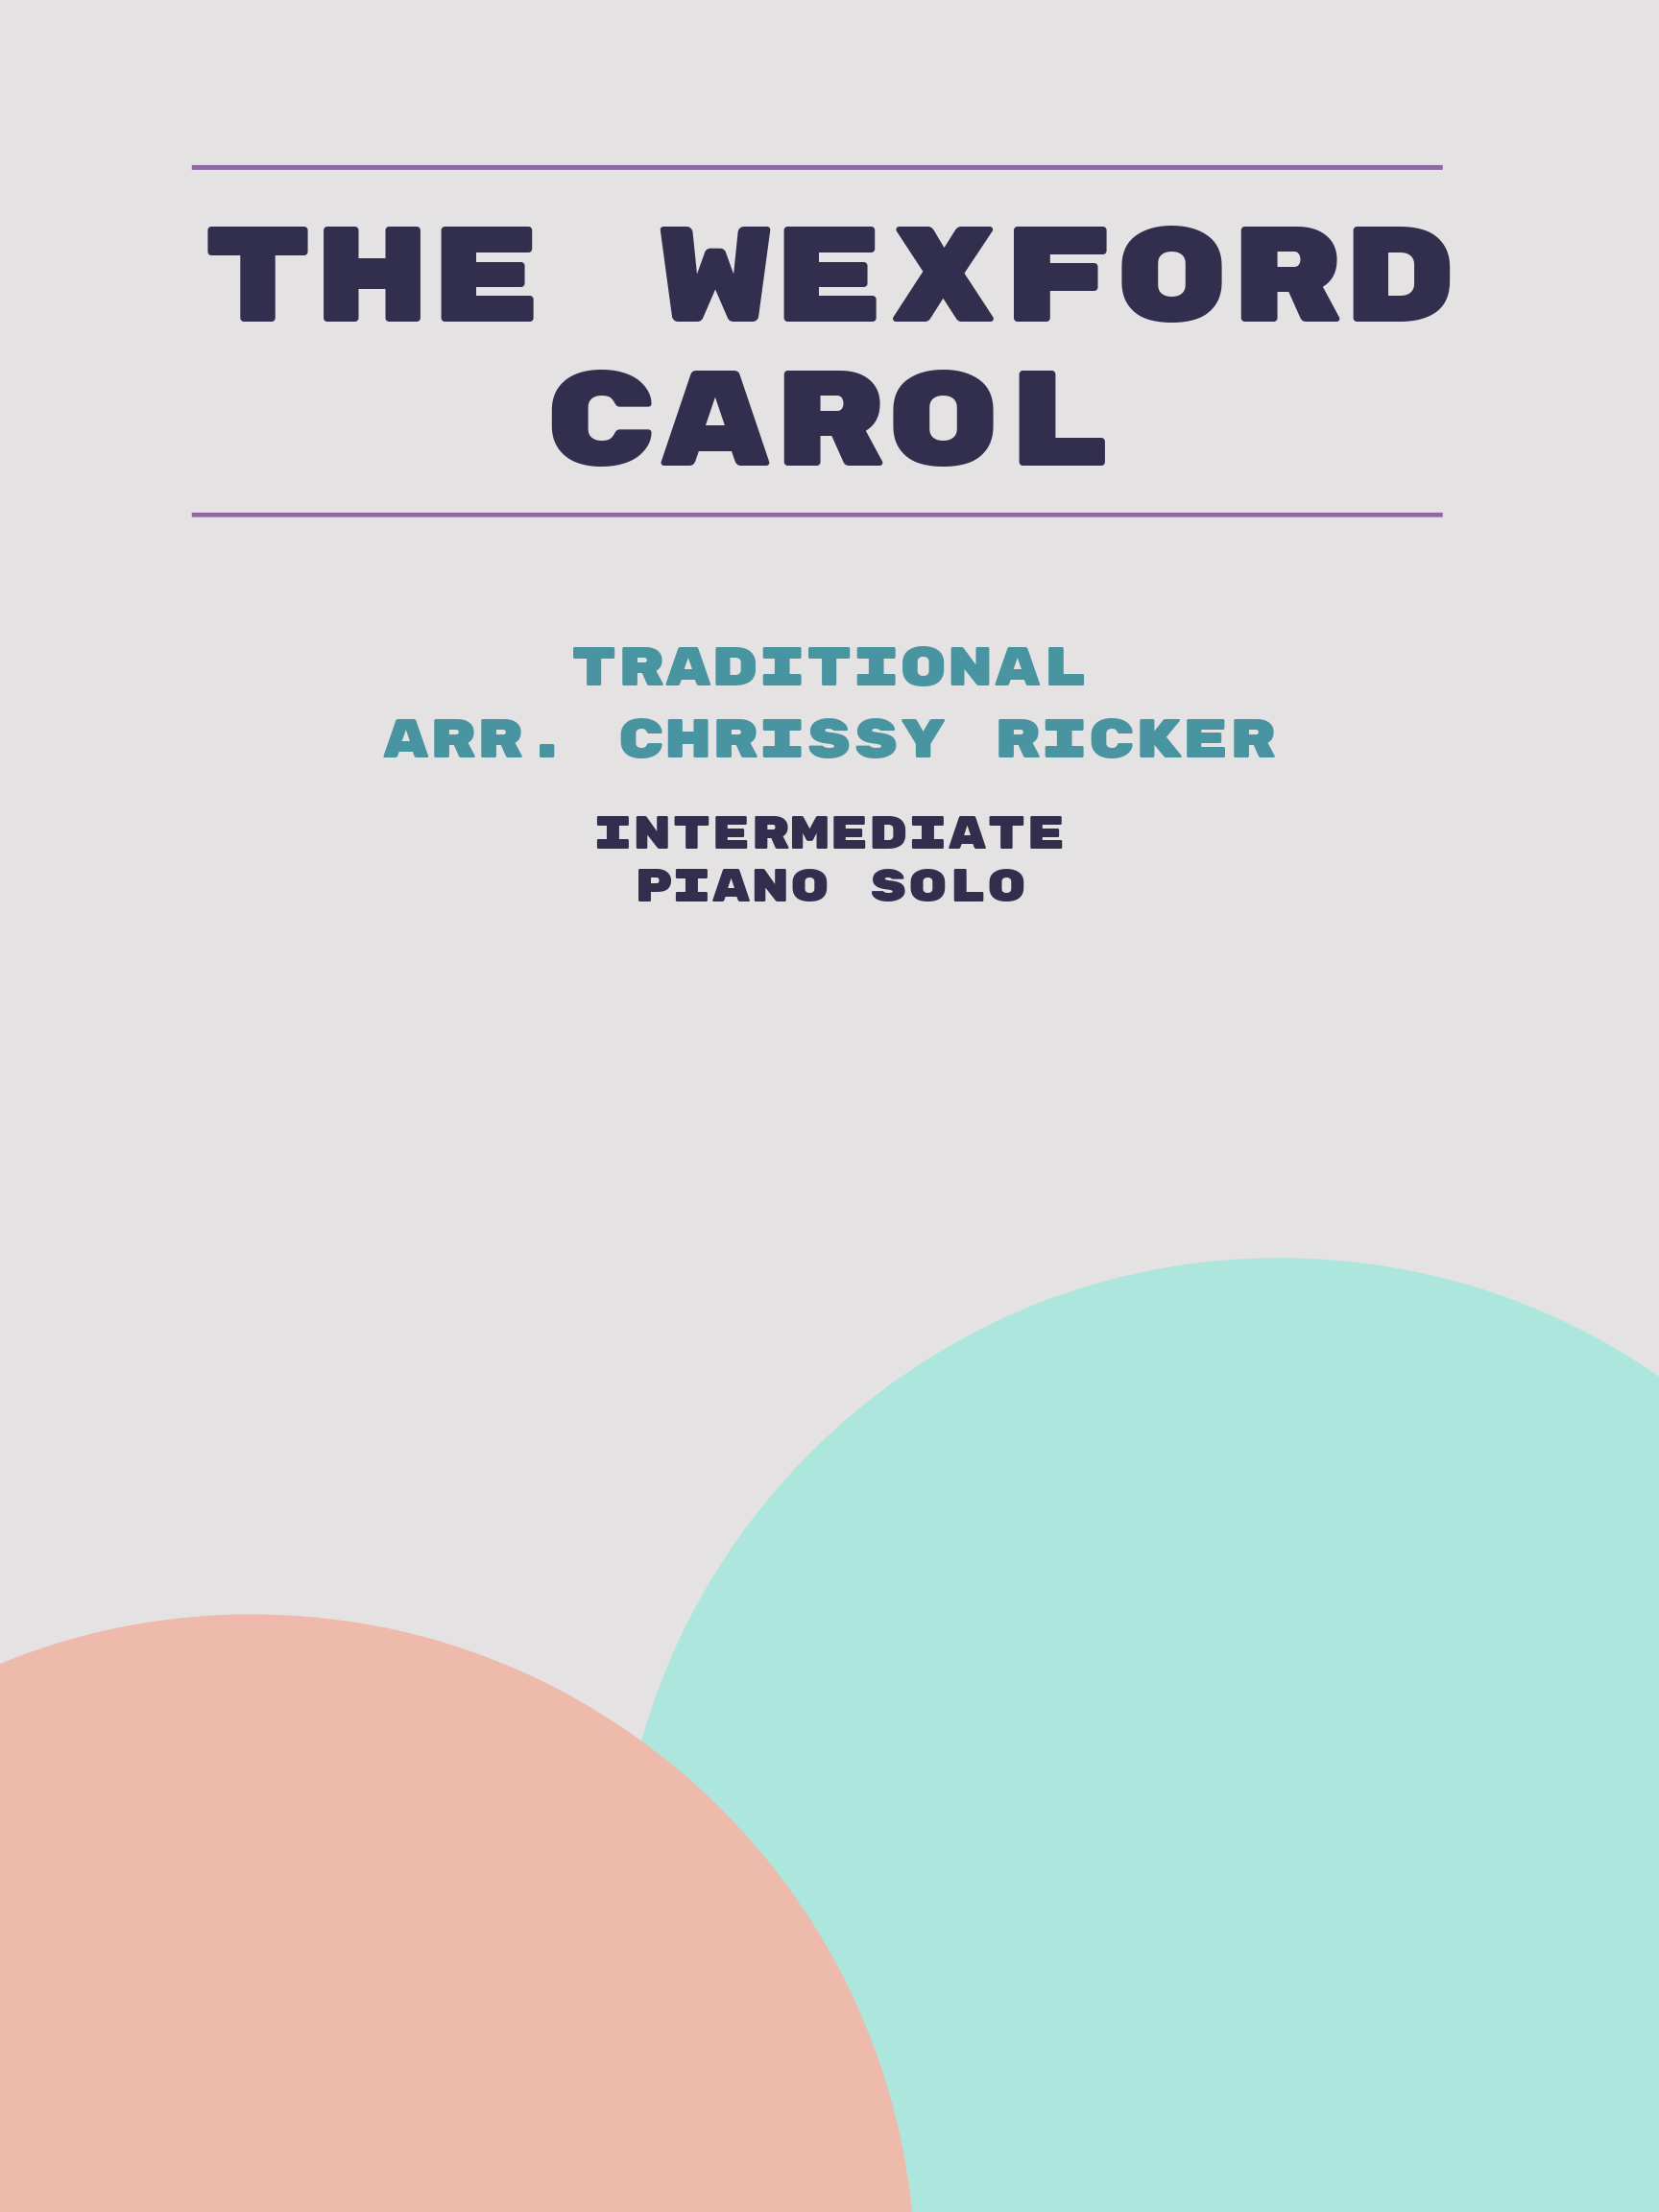 The Wexford Carol by Traditional